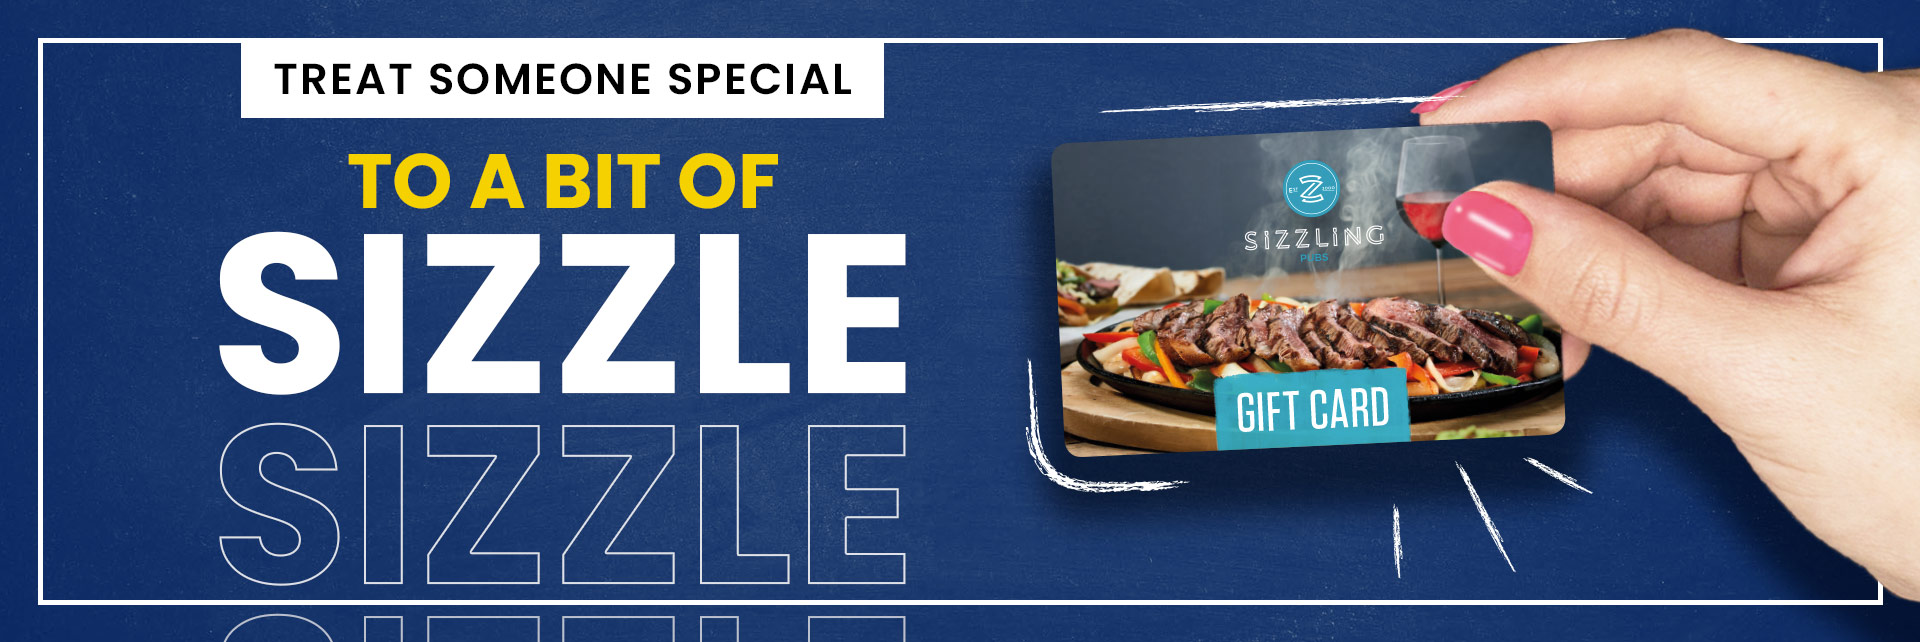 Sizzling Pubs Gift Card at The Brooklands in Coventry